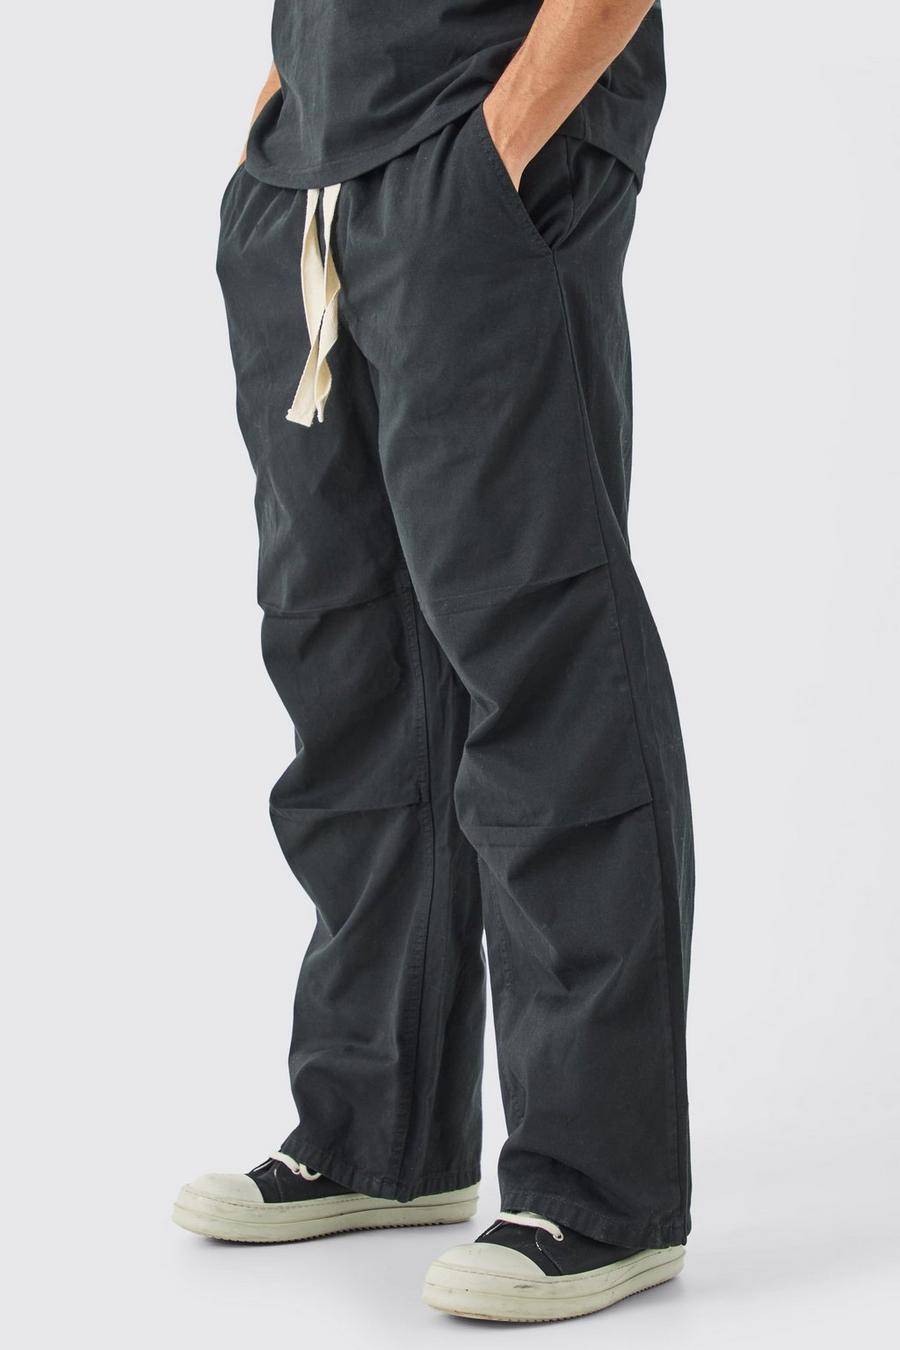 Charcoal Elasticated Waist Contrast Drawcord Baggy Trouser 